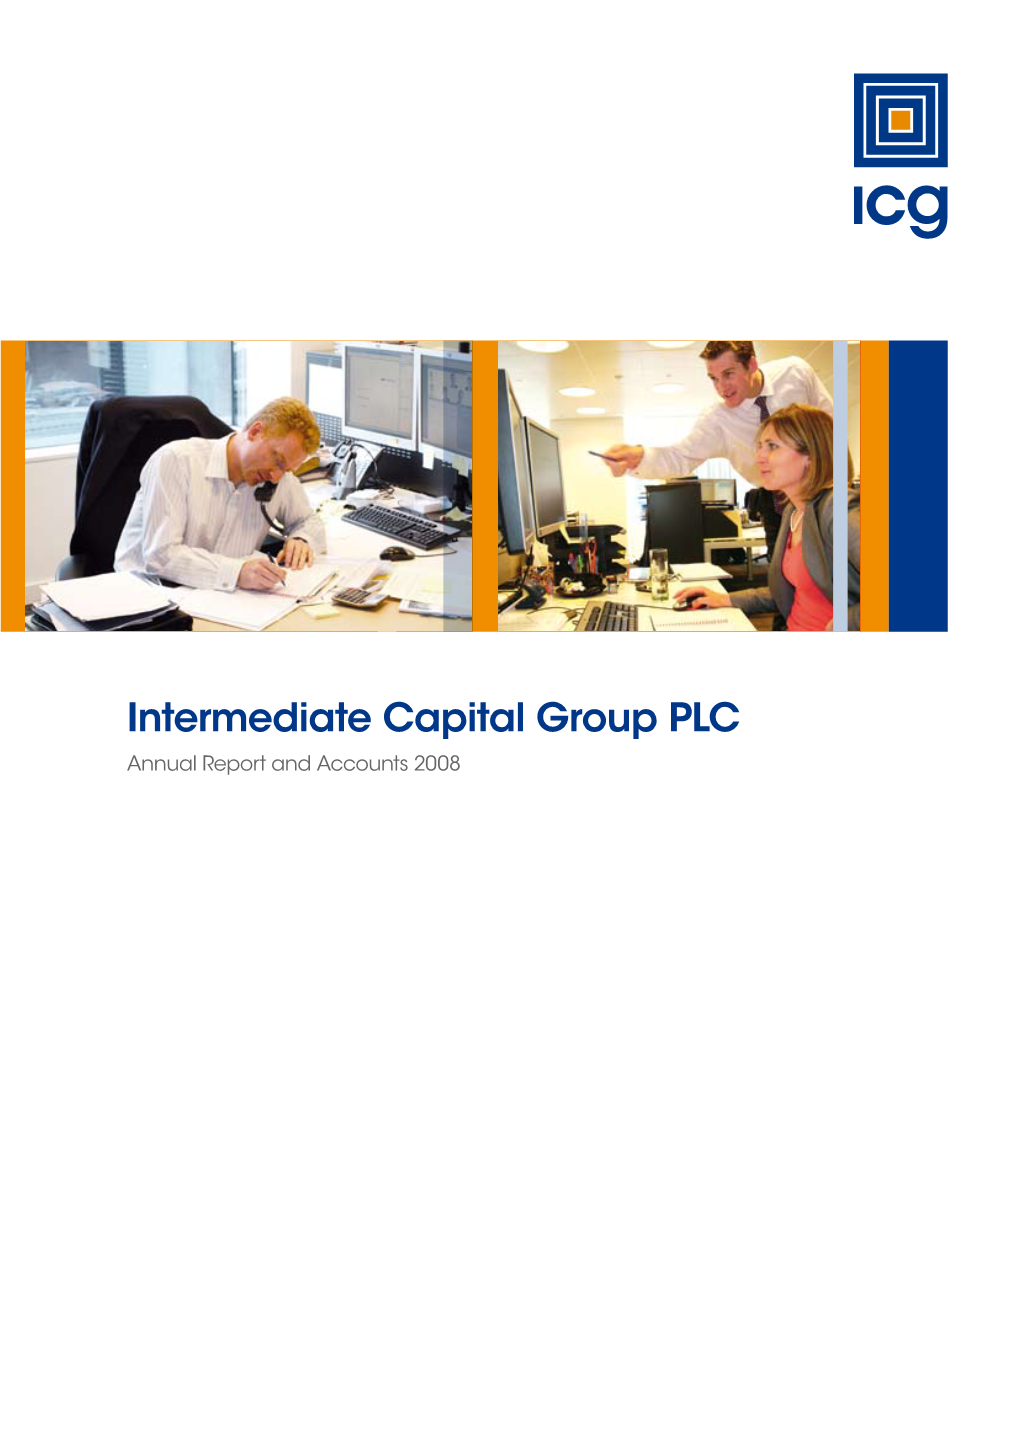 Intermediate Capital Group PLC Annual Report and Accounts 2008